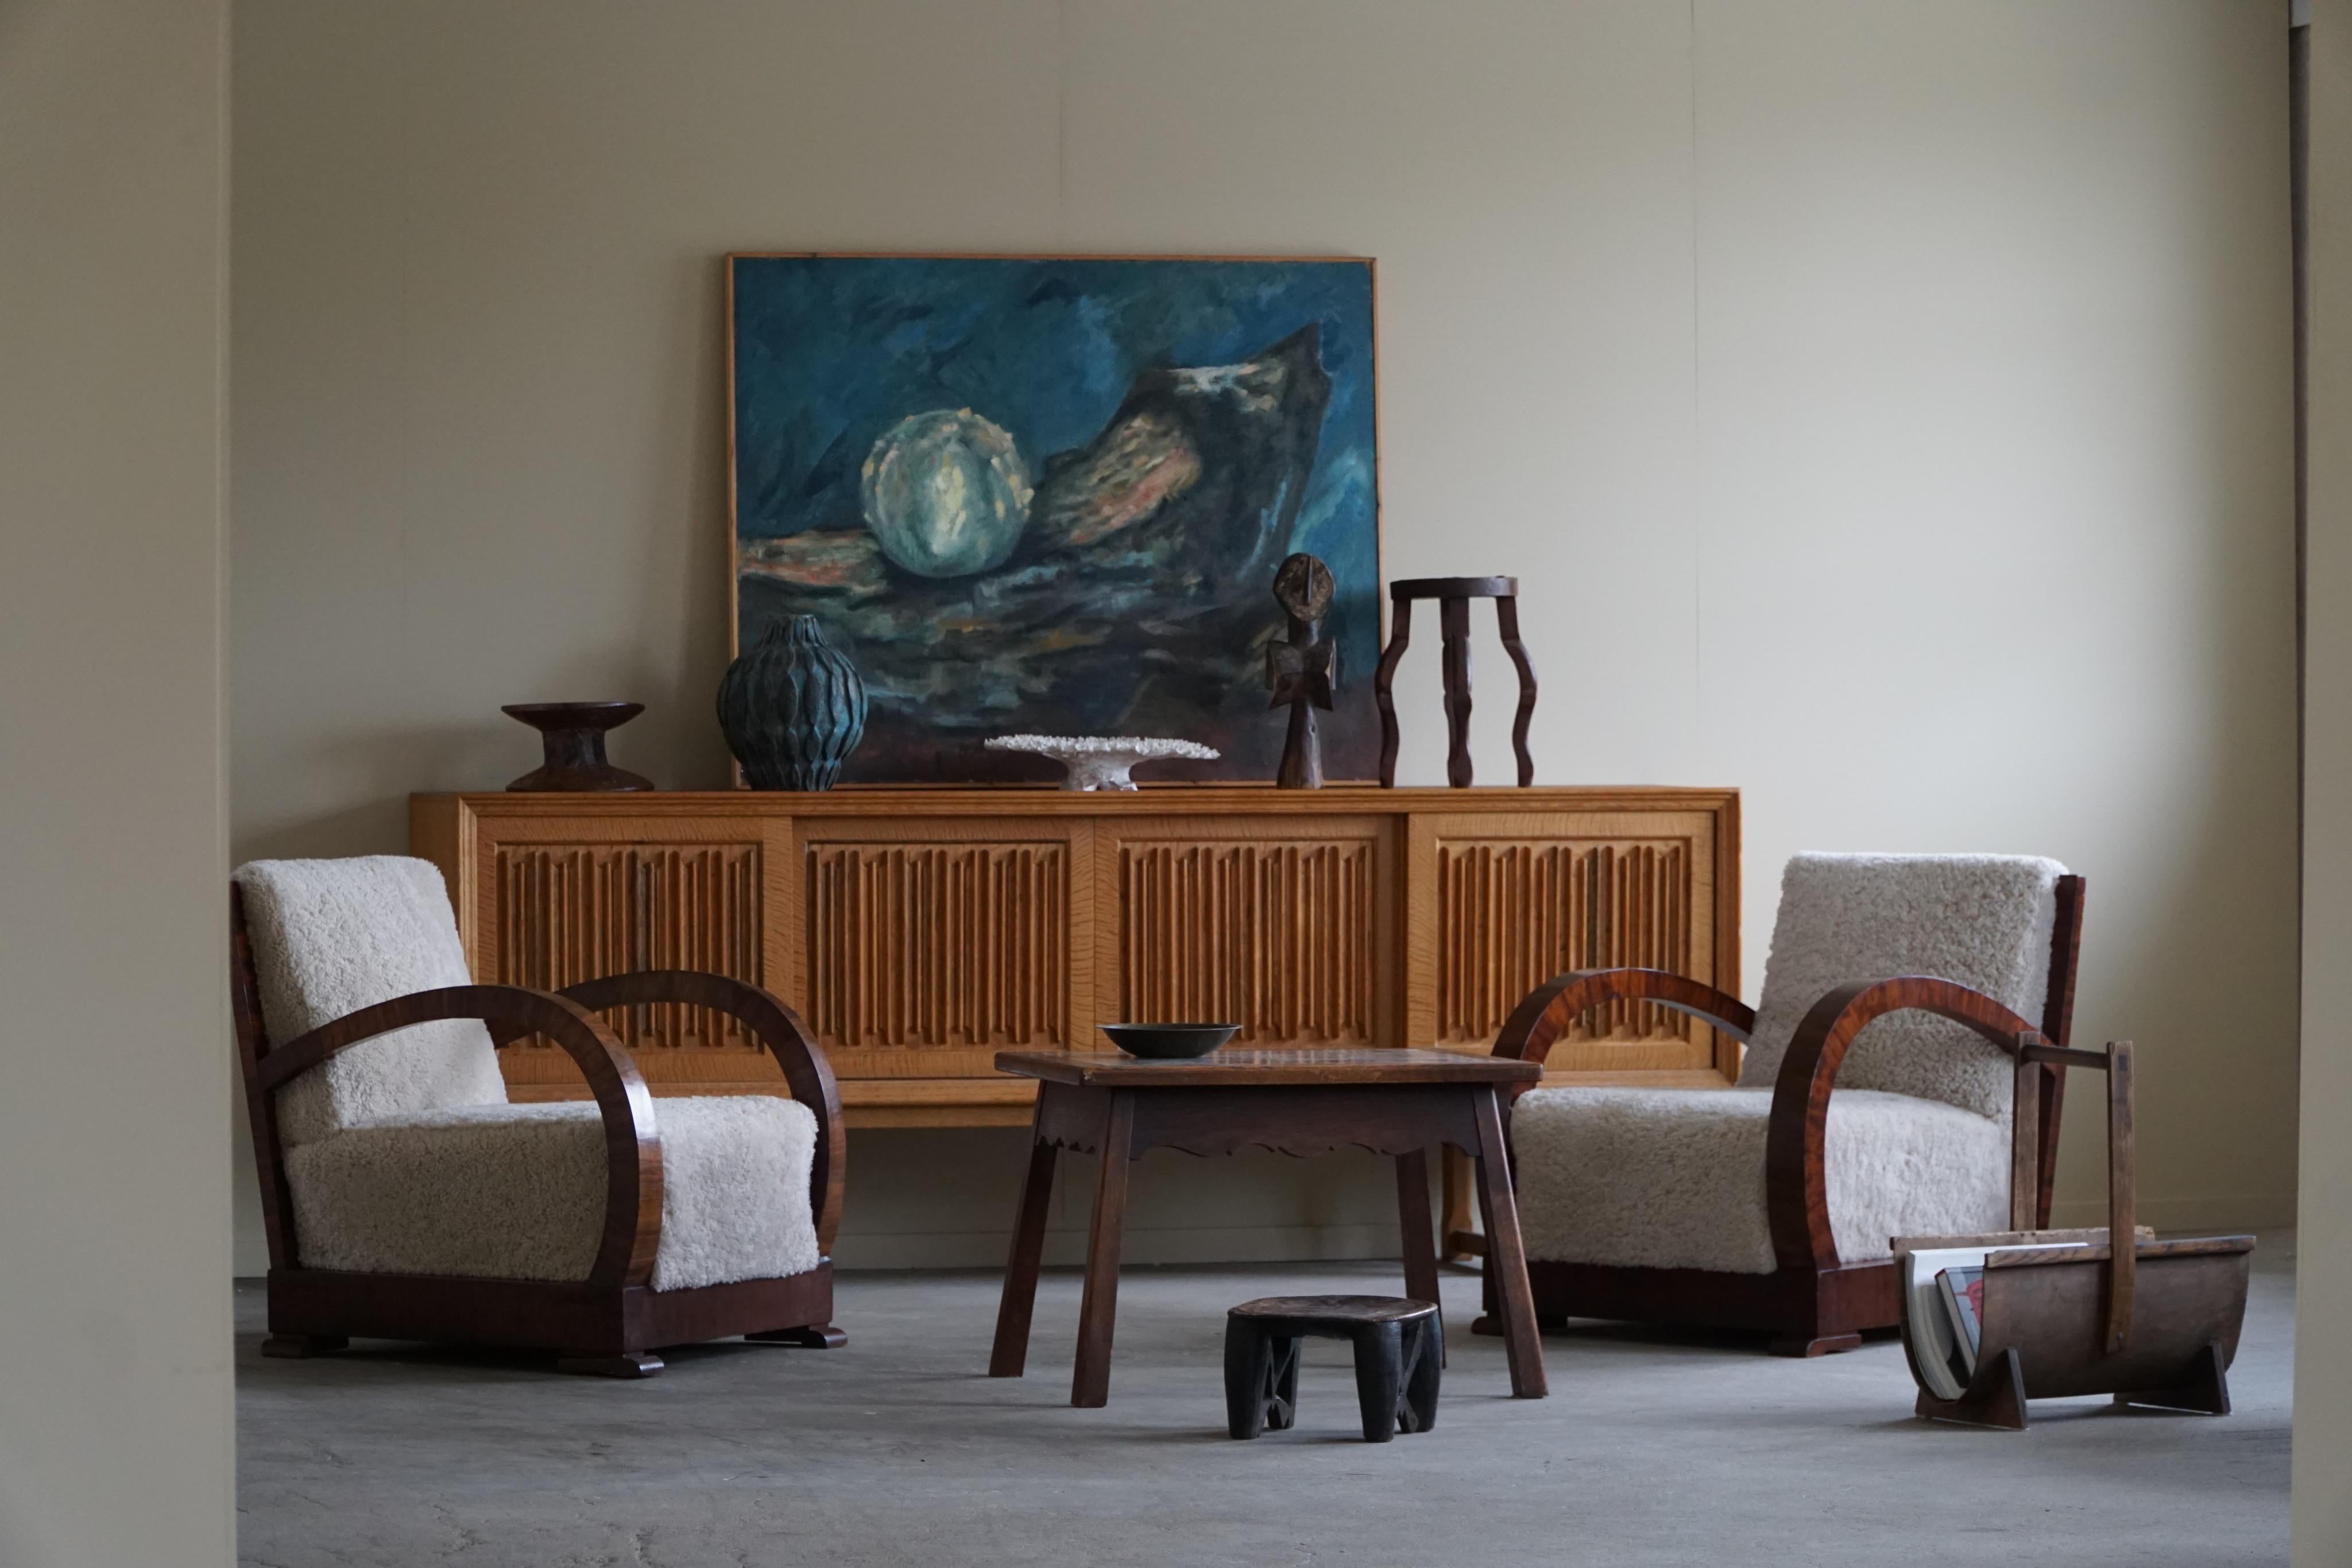 Pair of curved Art Deco lounge chairs, with armrest in walnut, made in 1930s by a Danish cabinetmaker. The chairs have been recently reupholstered in luxurious lambswool from SIPO, adding a touch of warmth and texture to the design. The lambswool is